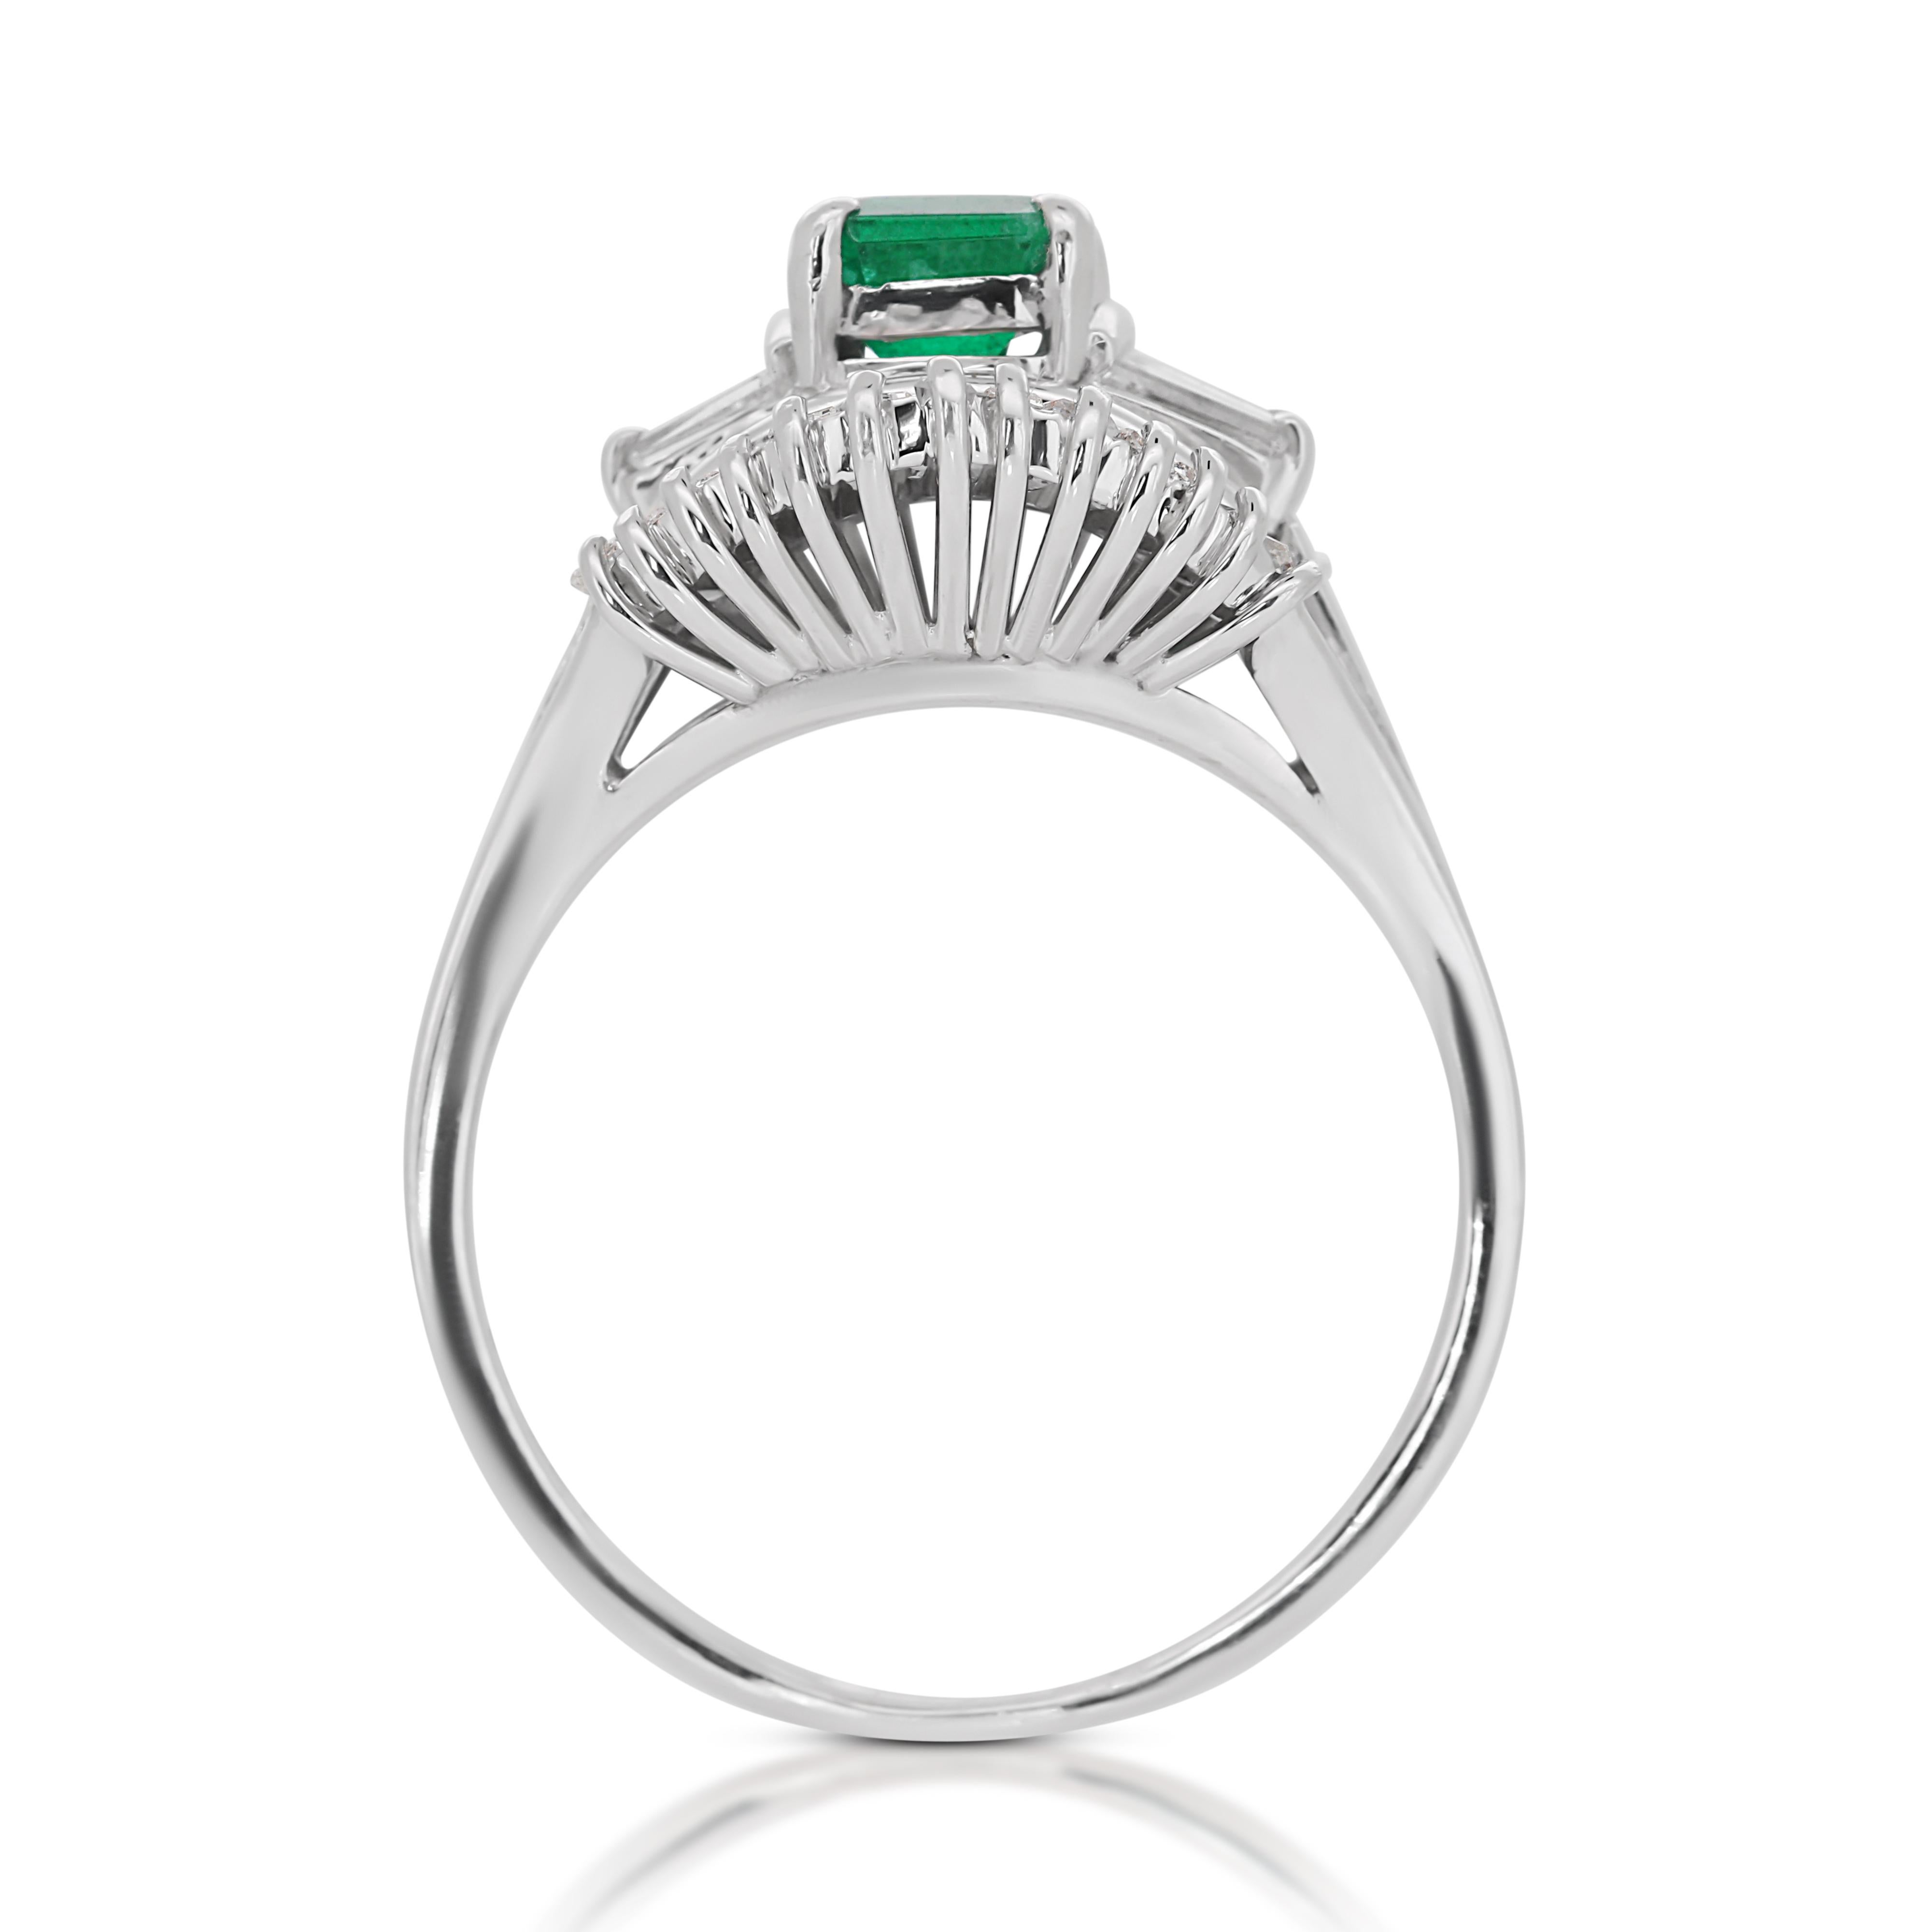 Stunning 2.08ct Emerald and Diamonds Halo Ring in 18k White Gold - IGI Certified For Sale 1